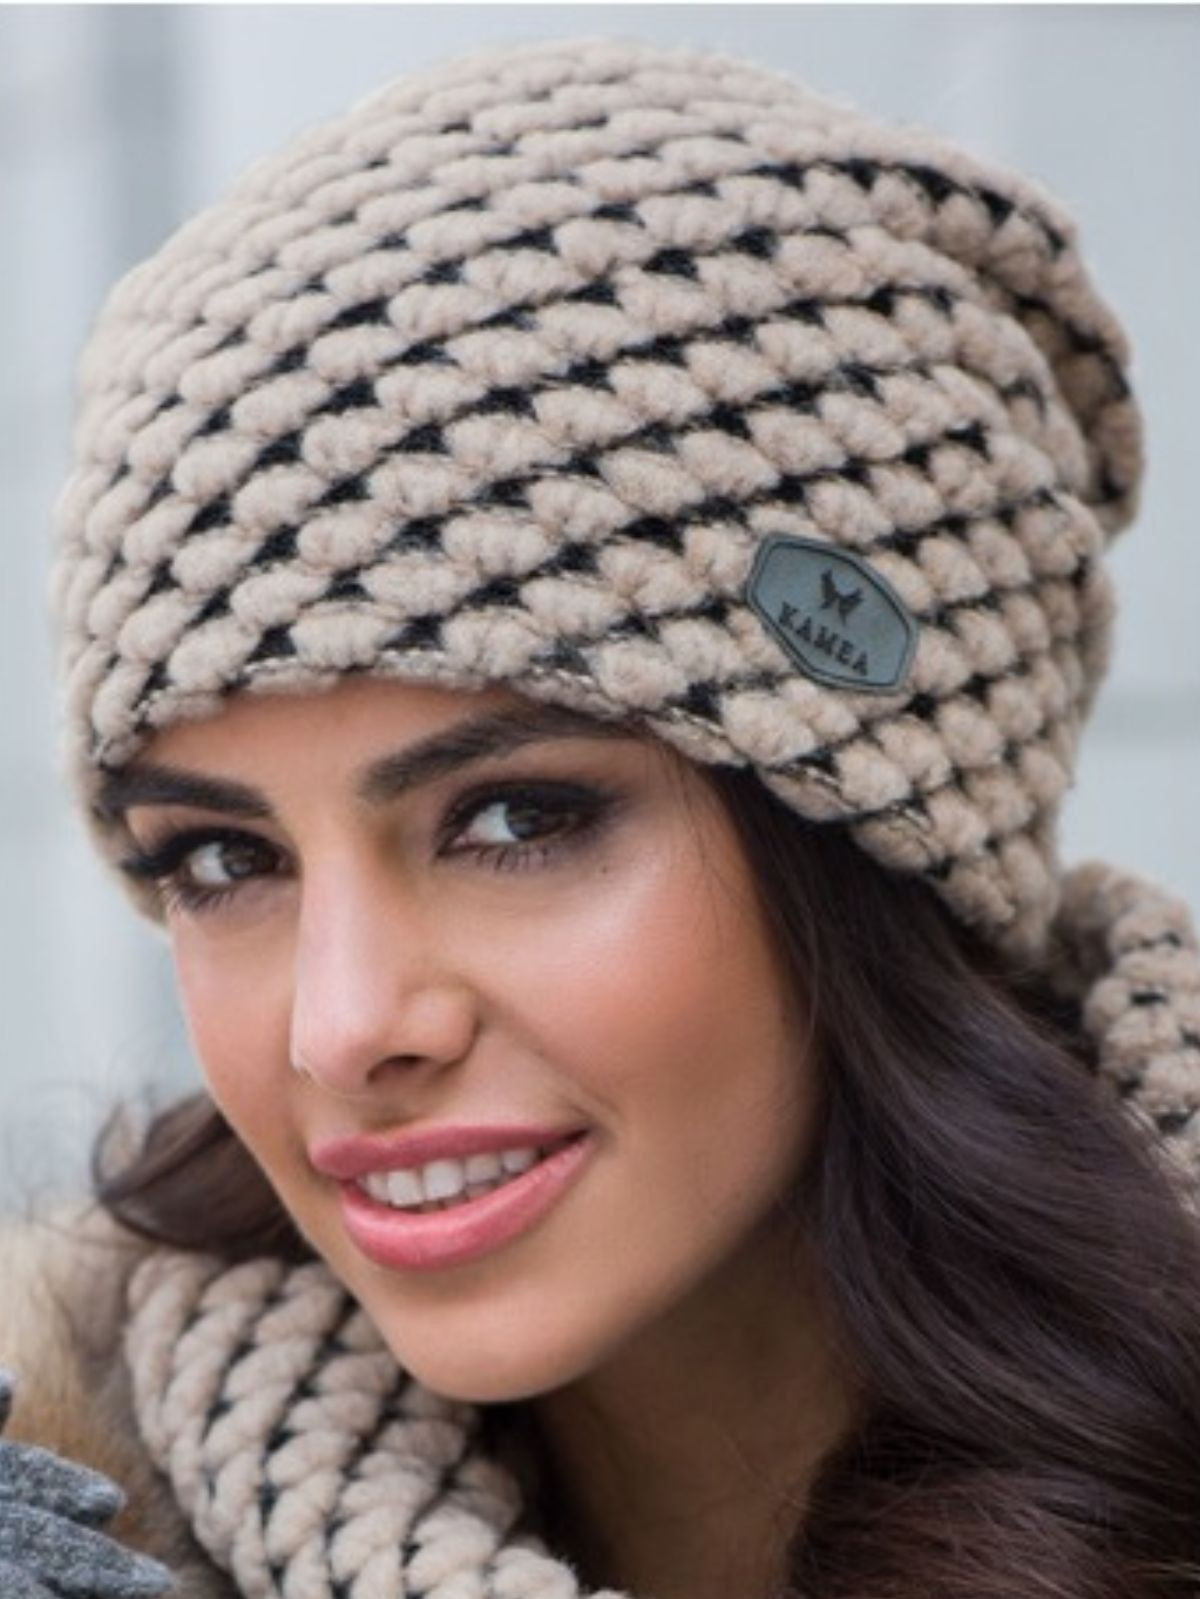 OLIWIA, tuque femme hiver